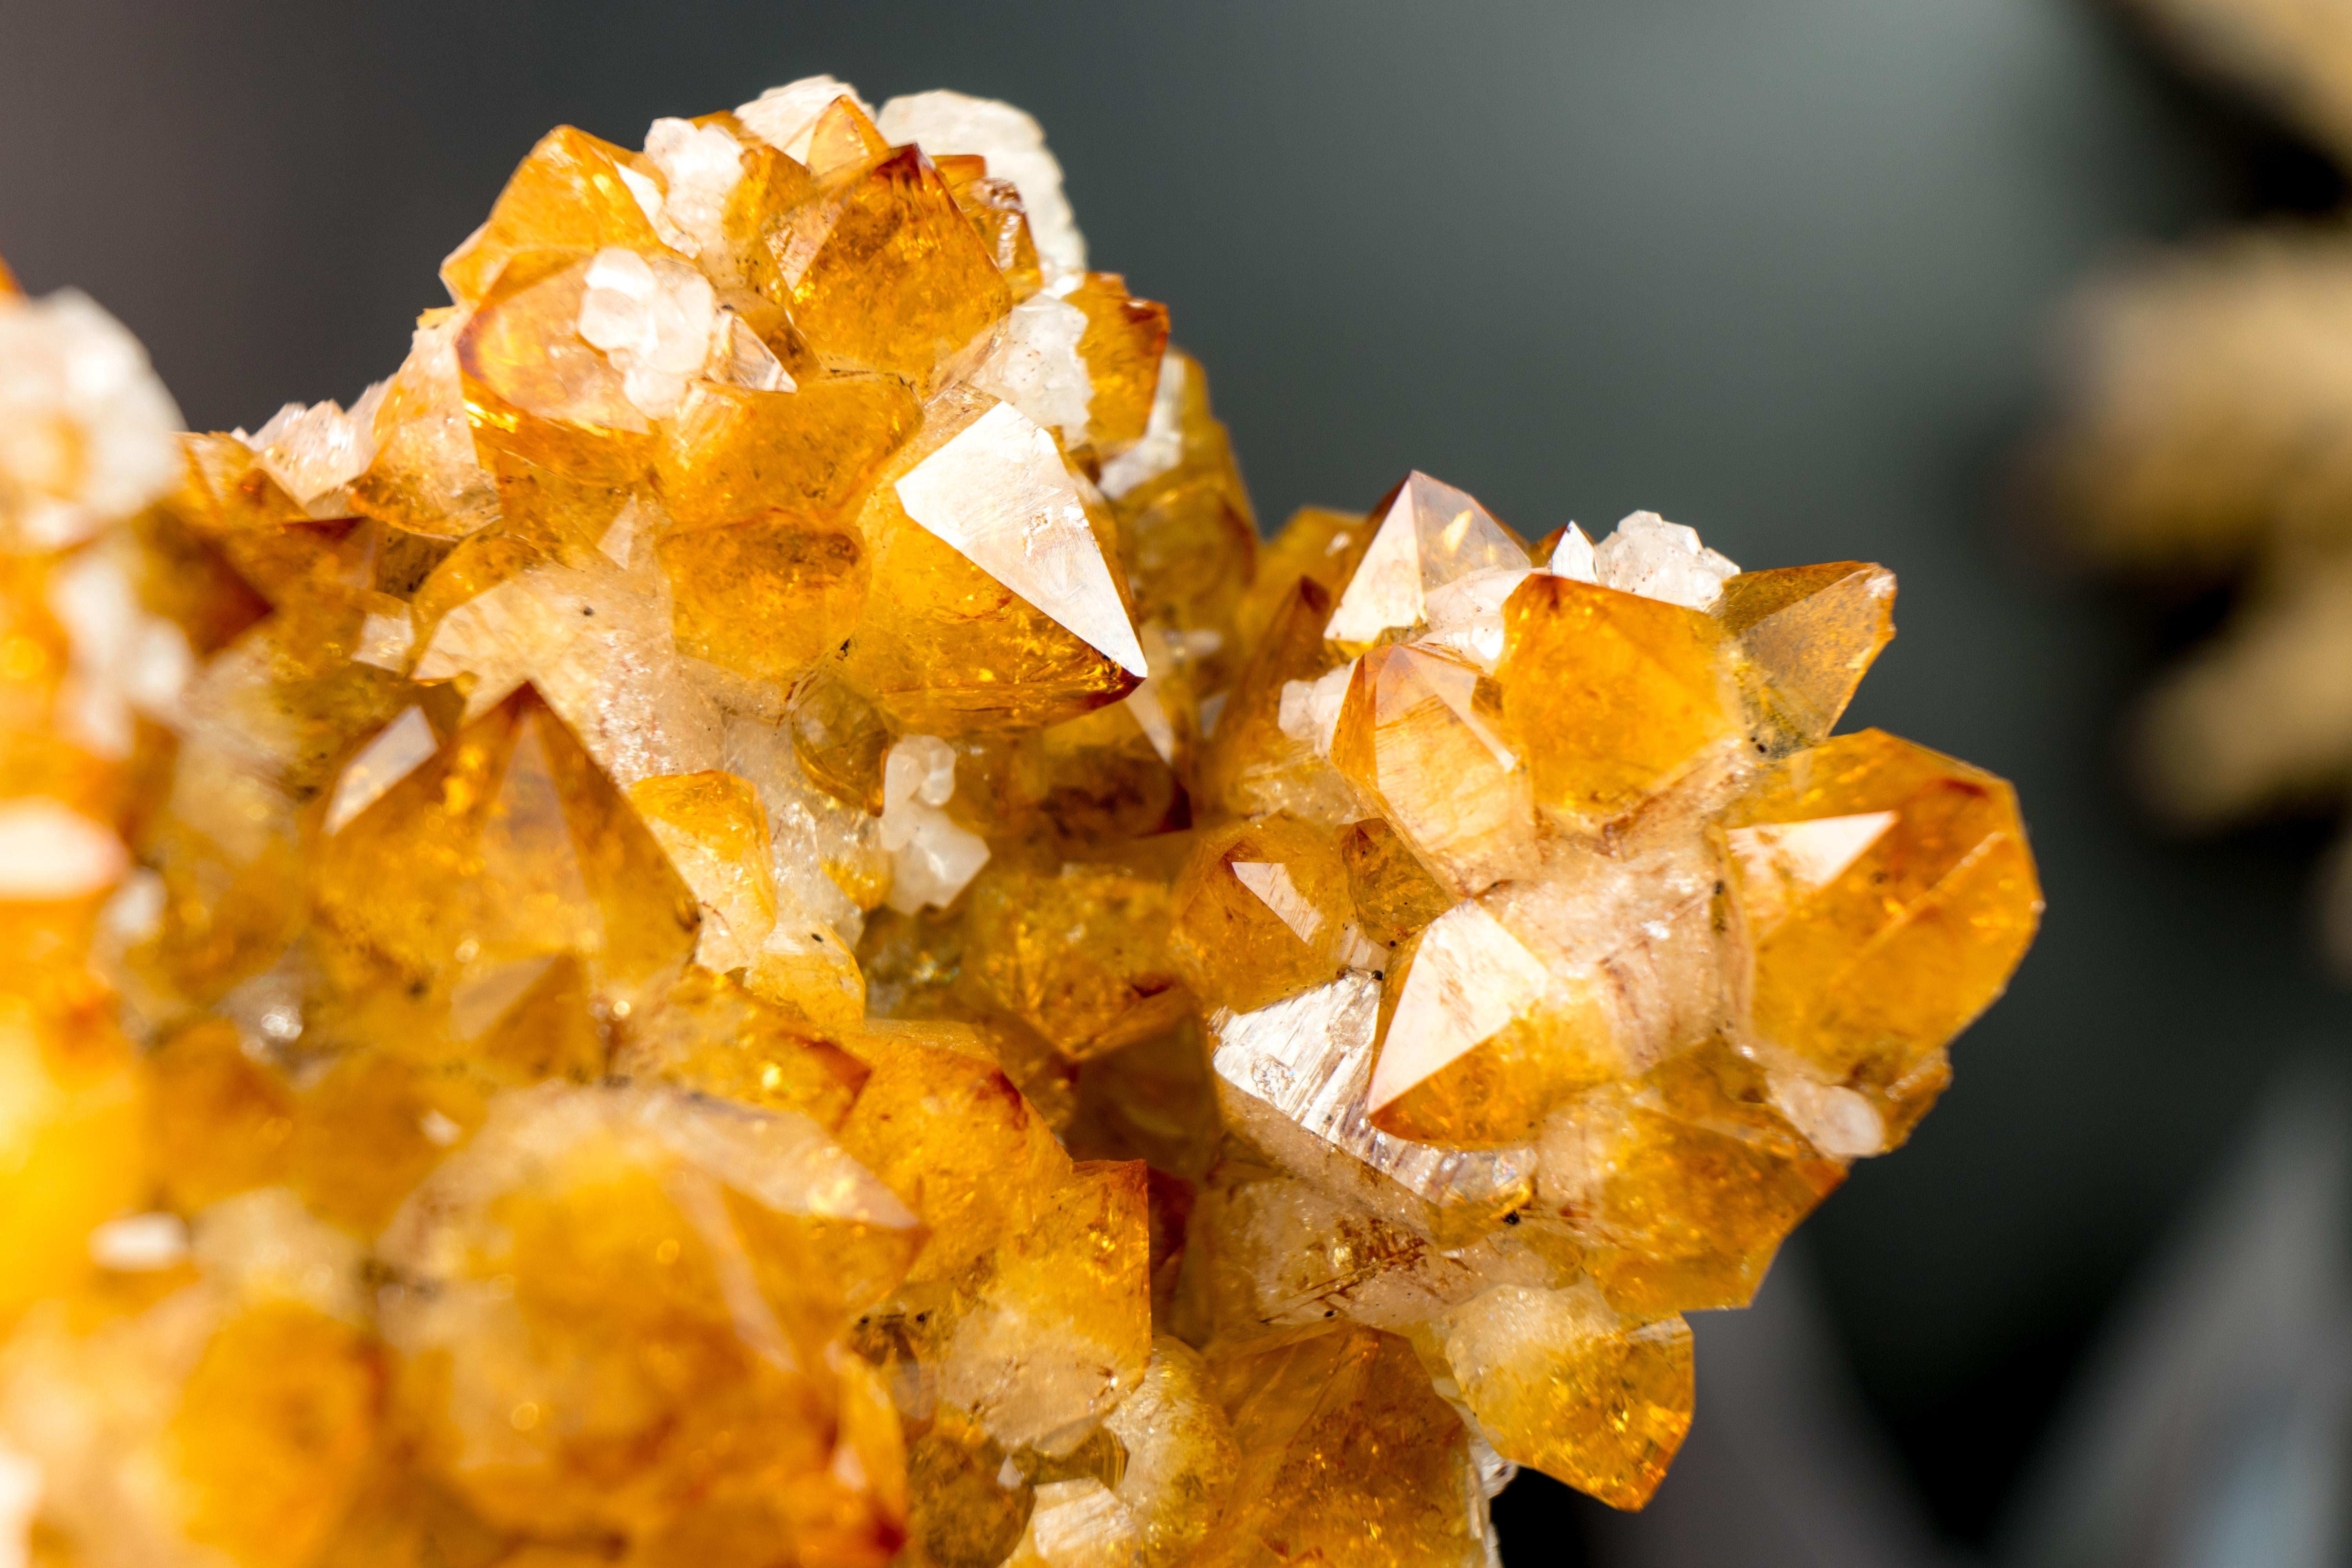 Agate Golden Orange Citrine Crystal Cluster with Stalactite Flower and Calcite For Sale